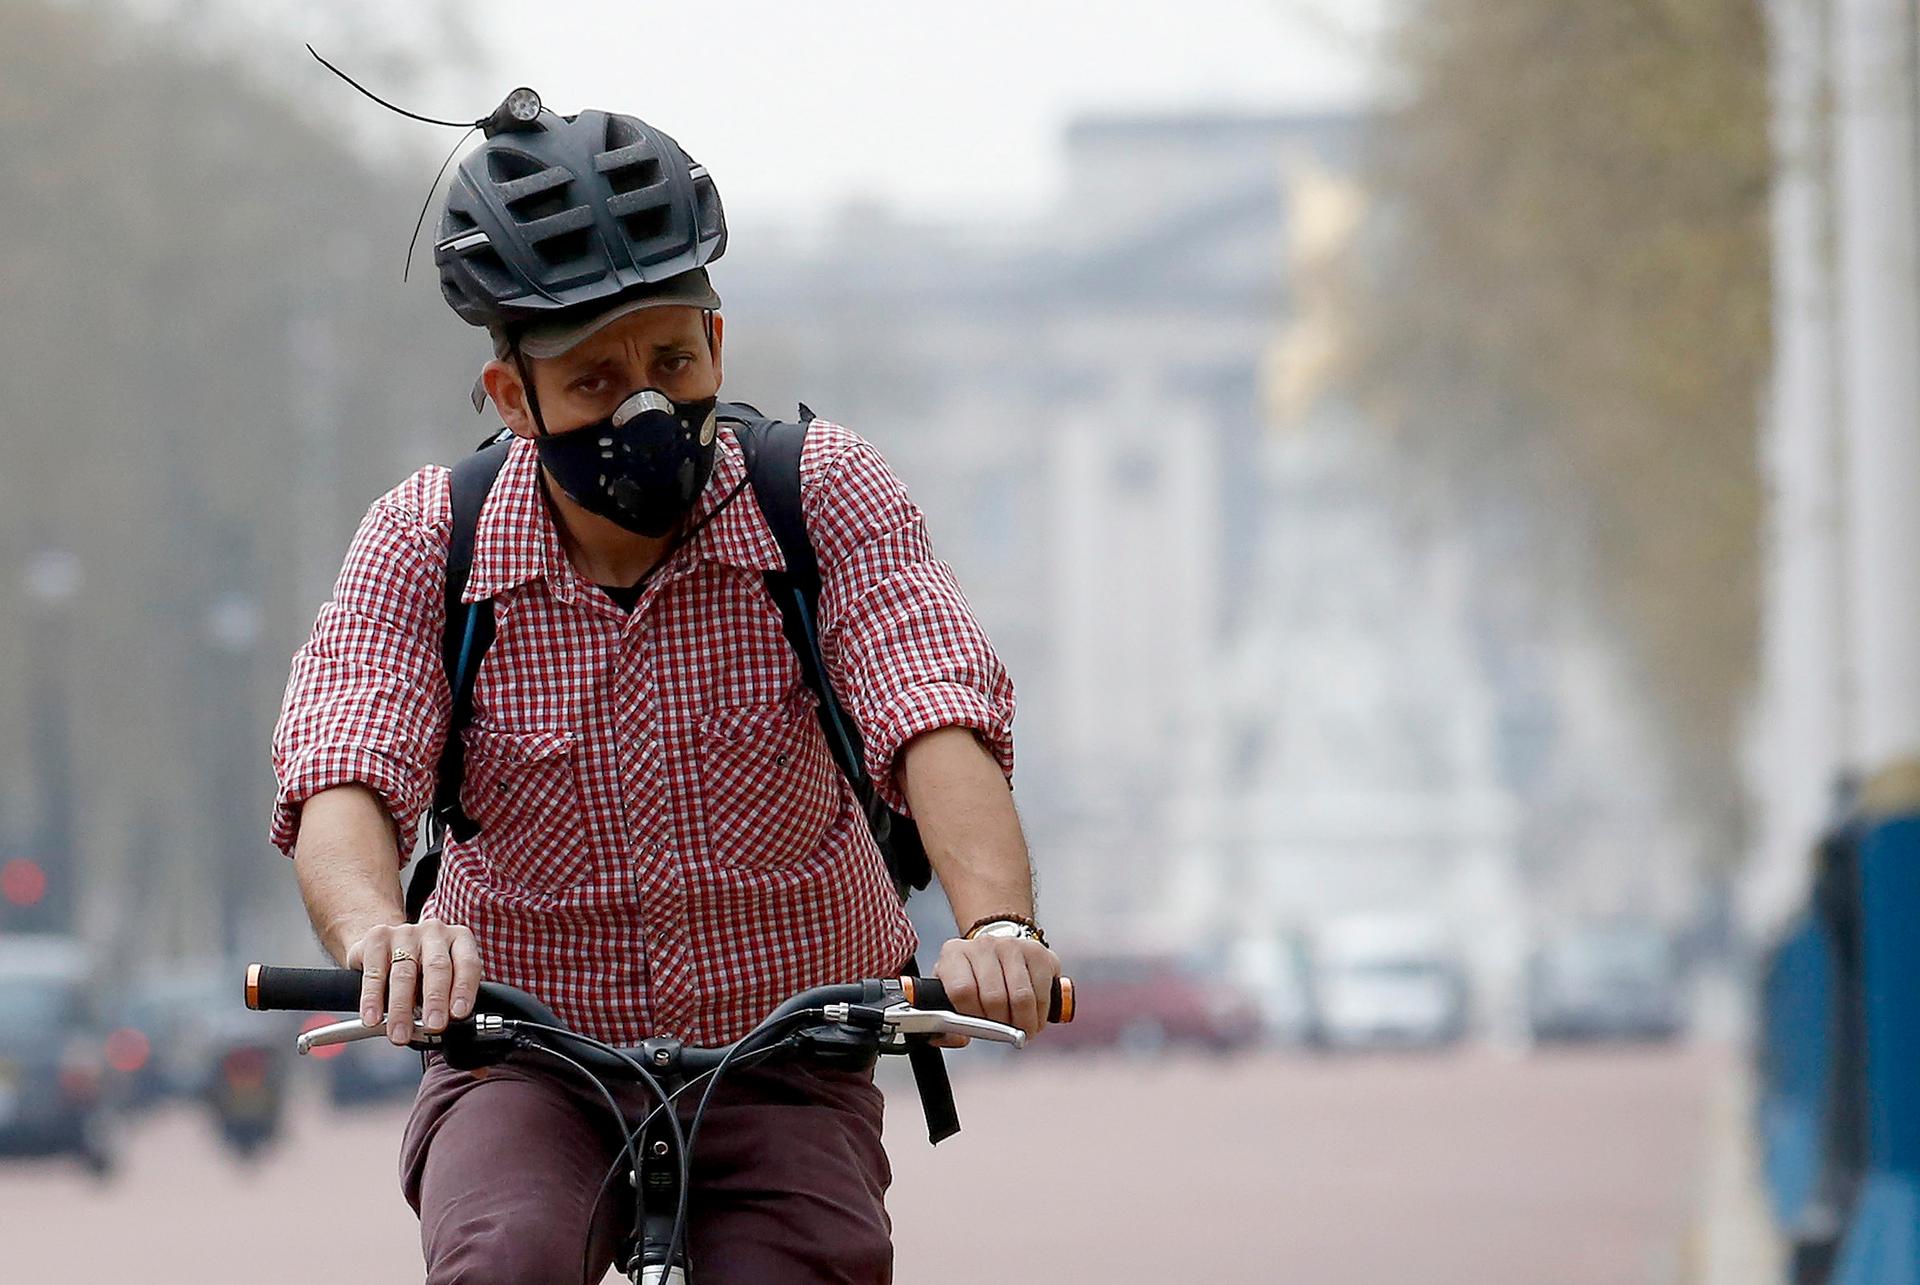 A cyclist wears a mask as he cycles near Buckingham Palace in London April 2, 2014. Britain's Meteorological Office forecast that London would be affected by smog this week, caused by powerful dust storms and strong winds in the Sahara.